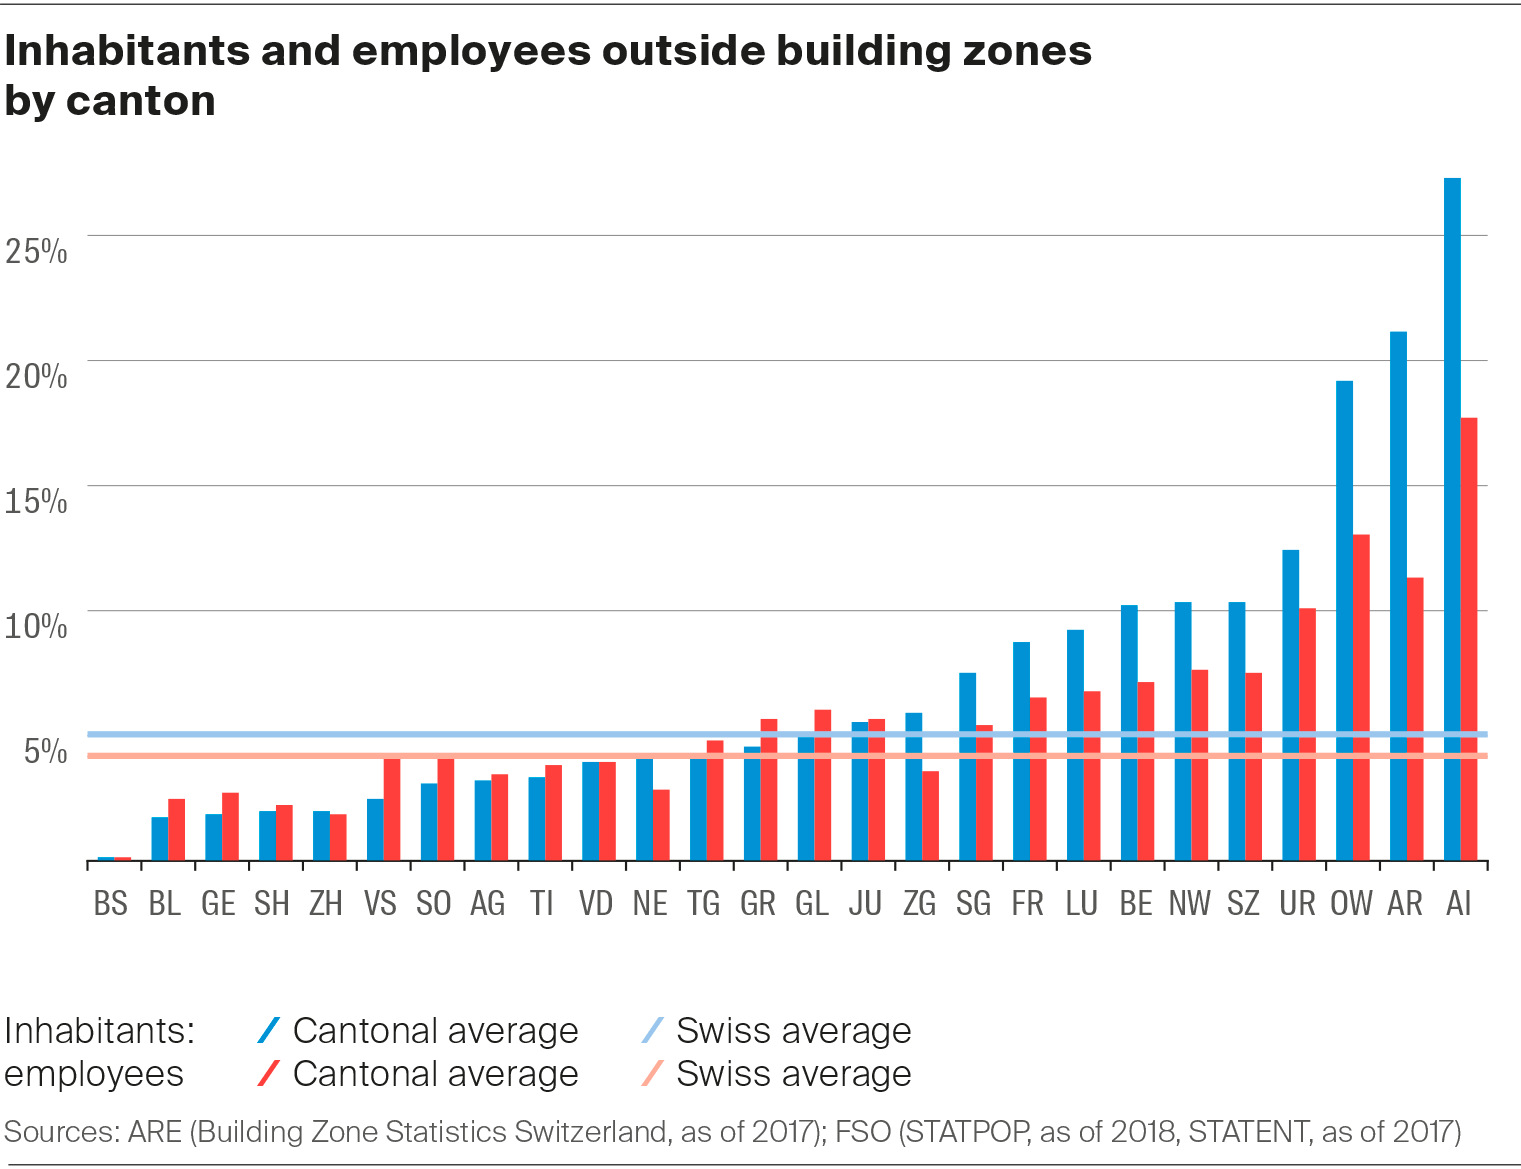 Inhabitants and employees outside building zones by canton